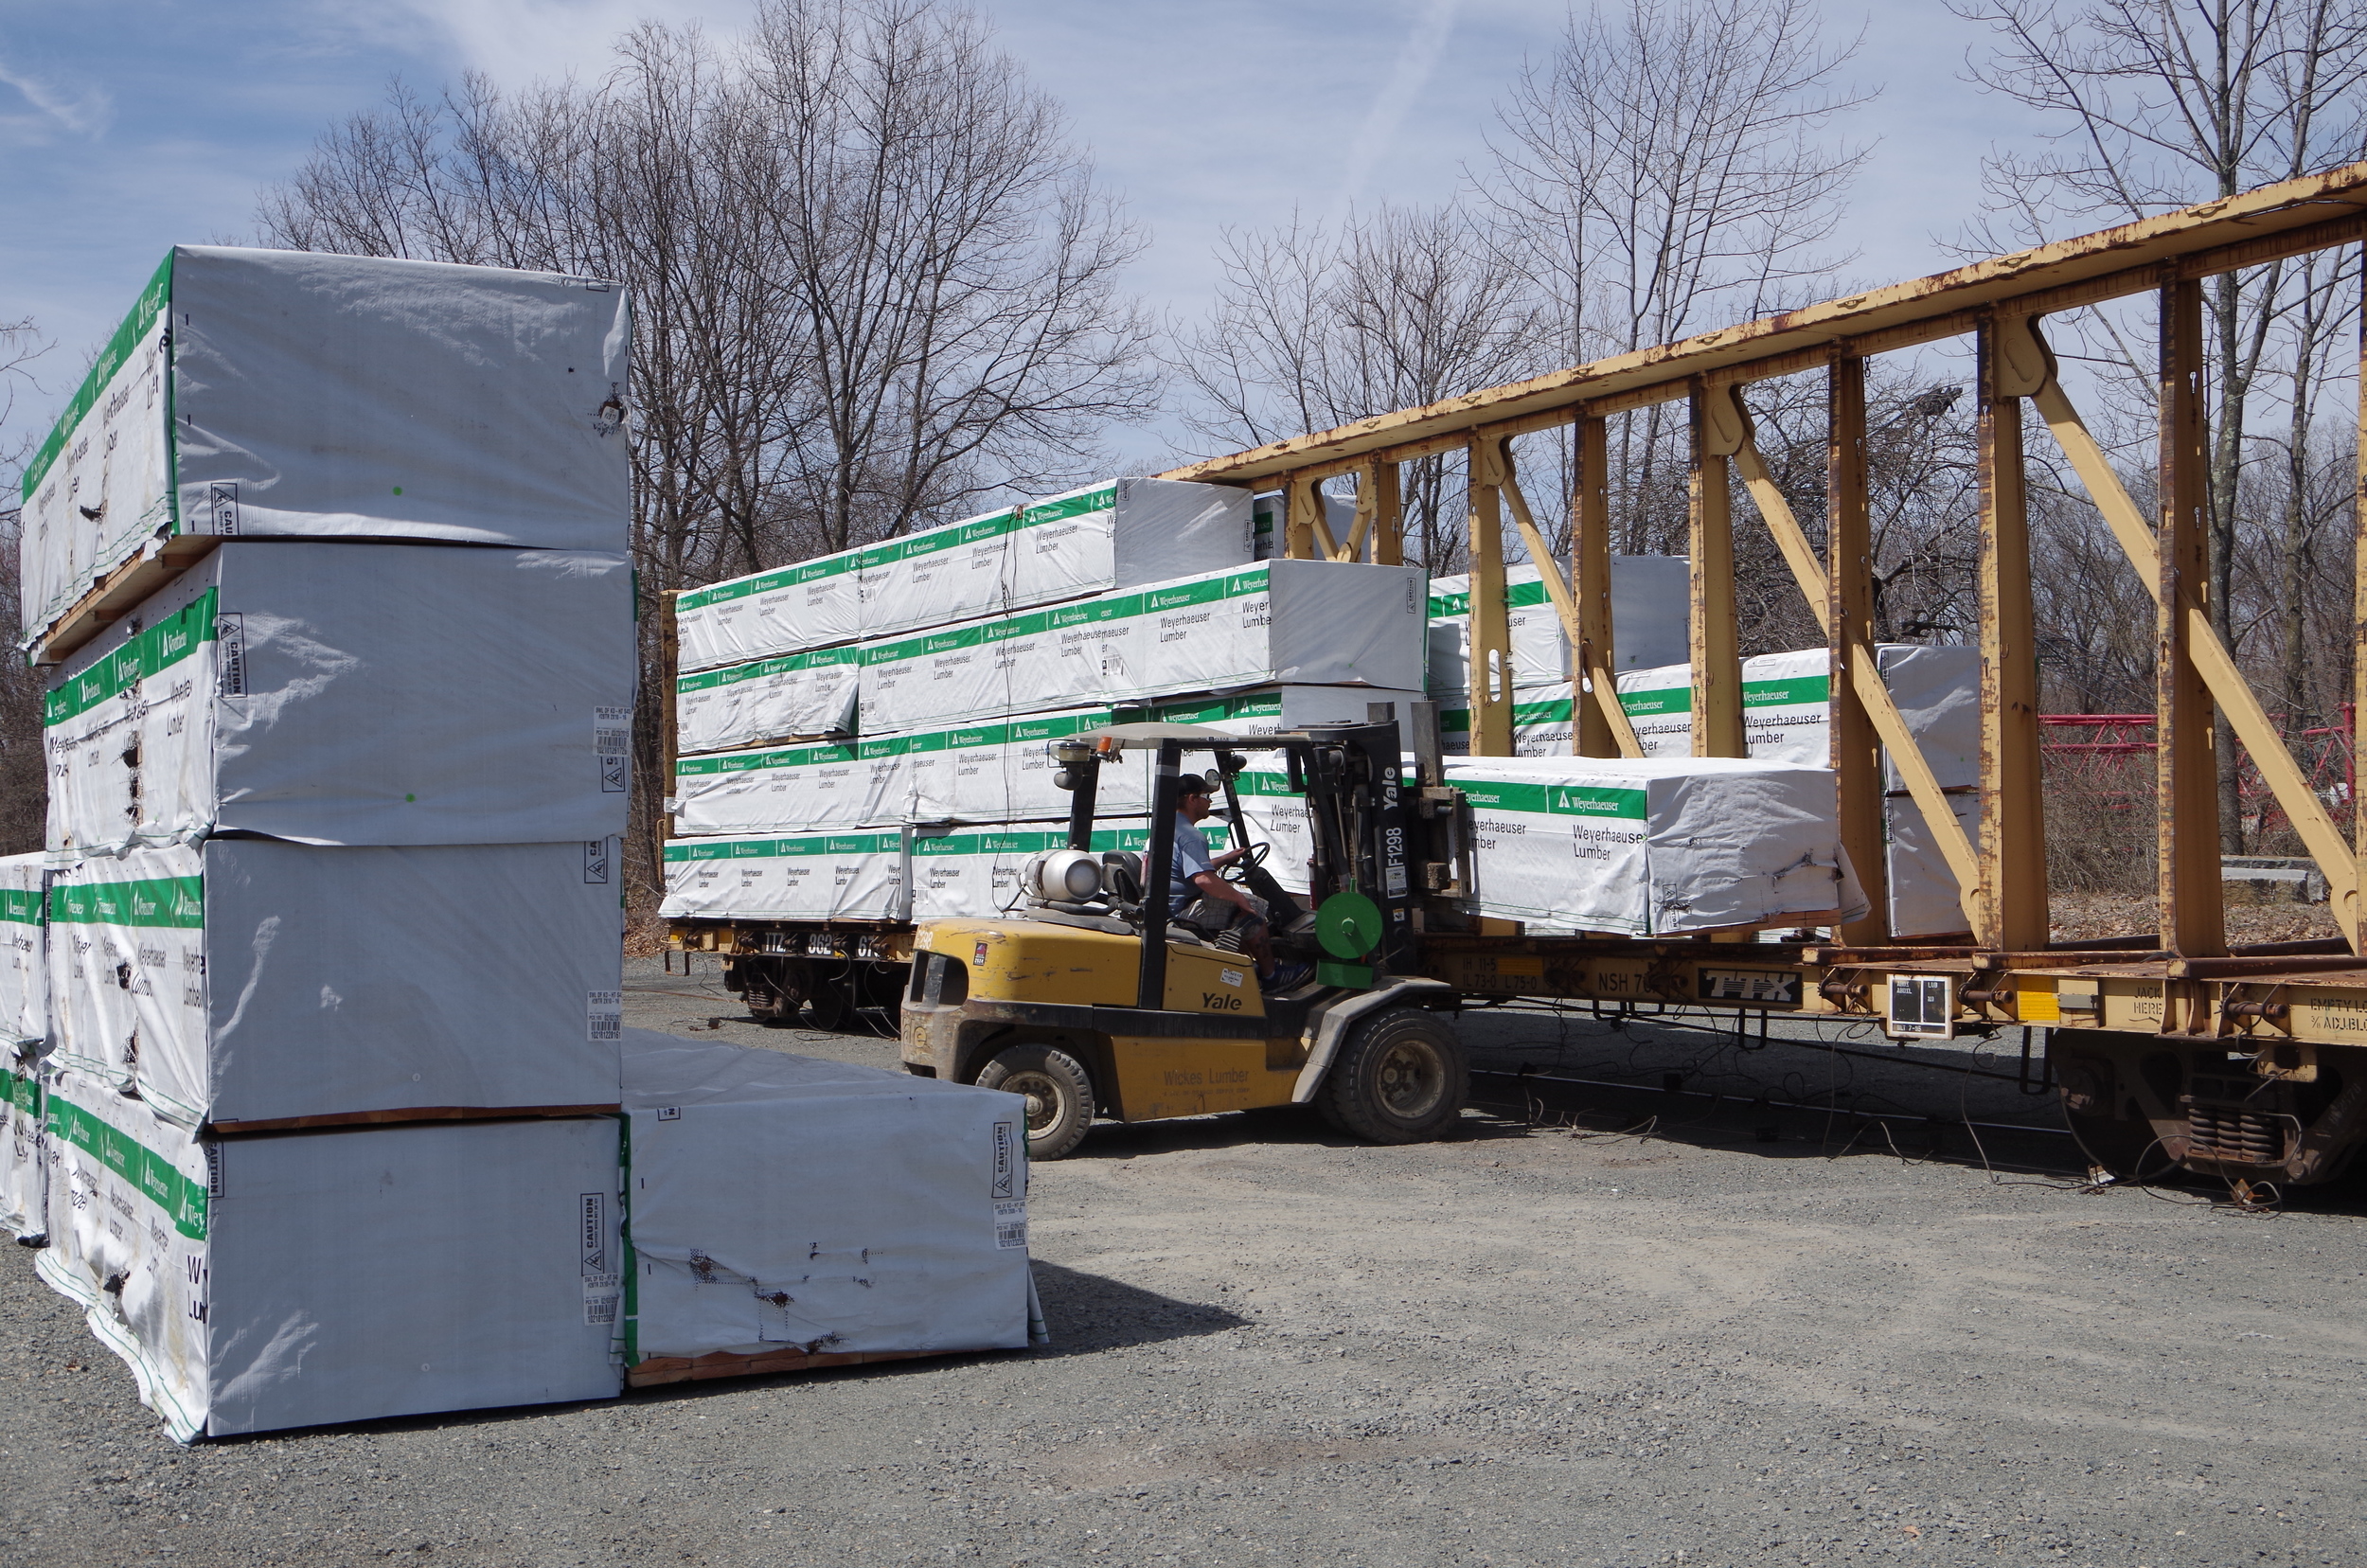   No Siding? No Problem.   Use One of Our Transload Facilities   See What Works Best For You  